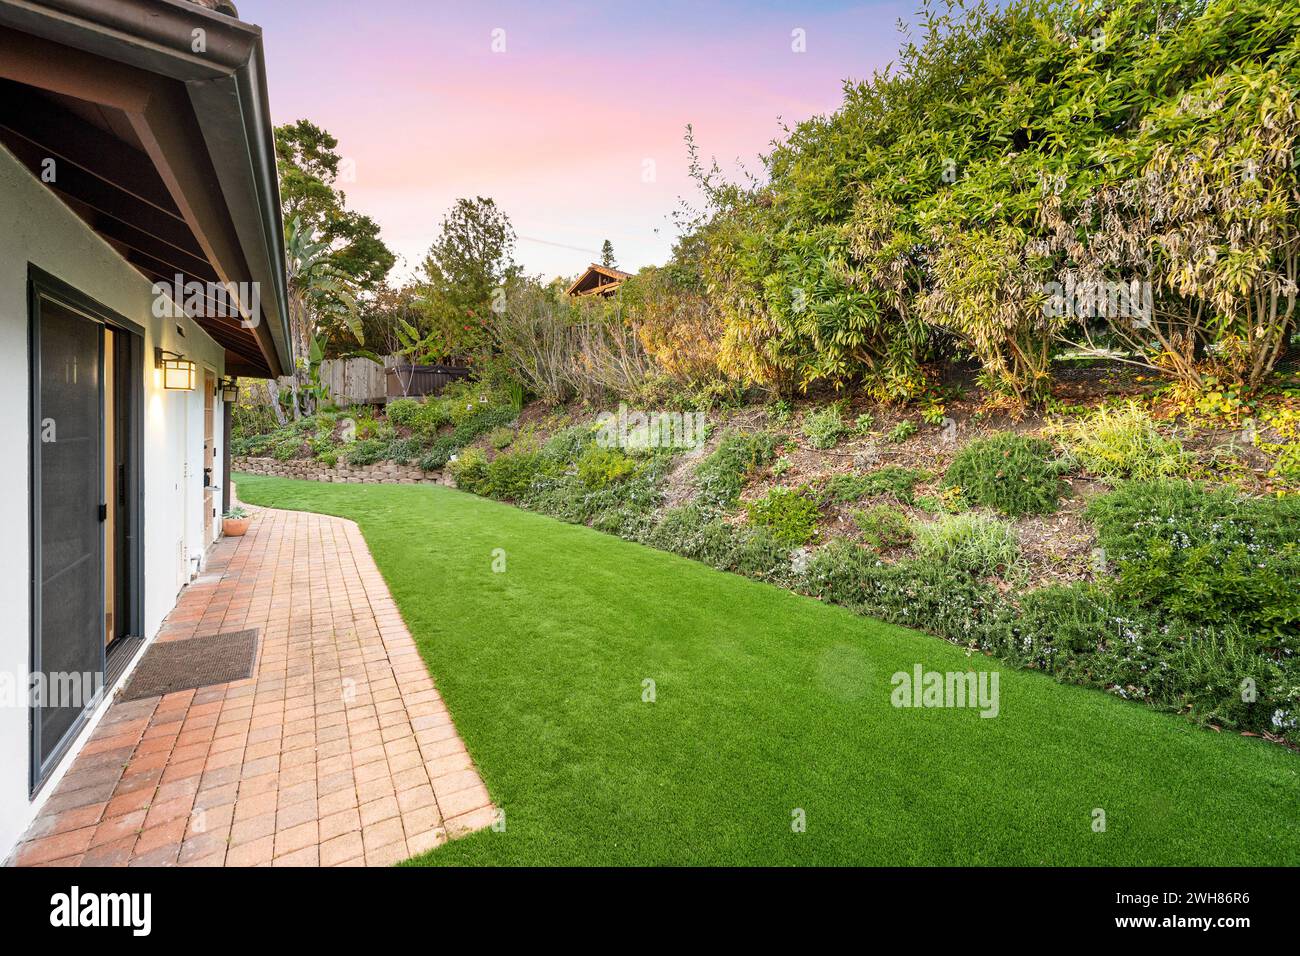 Brick paver patio surrounded by lush foliage in backyard of a residential home Stock Photo